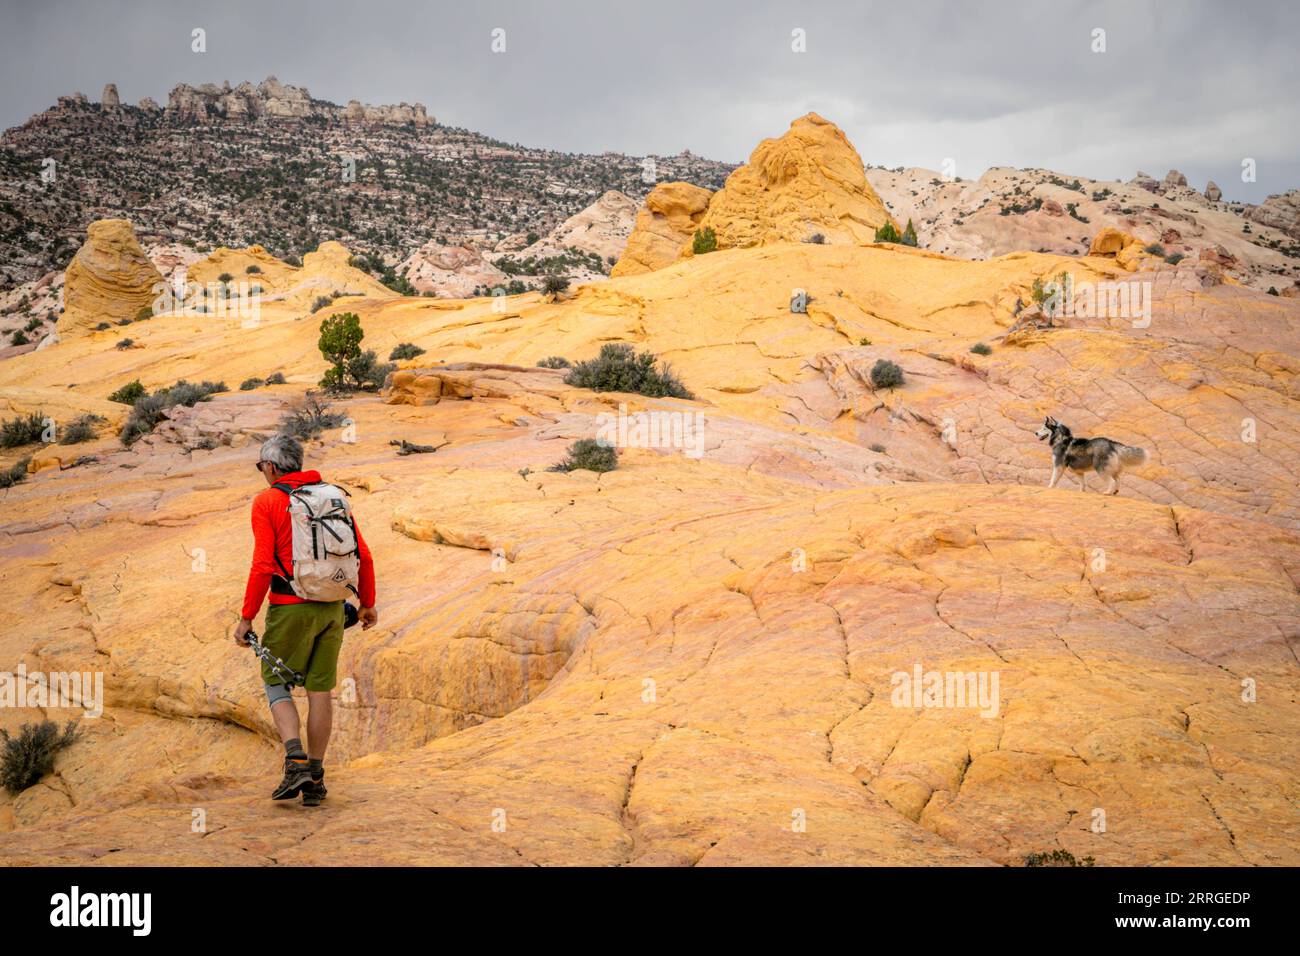 A hiker and dog traverse slabs of yellow sandstone Stock Photo